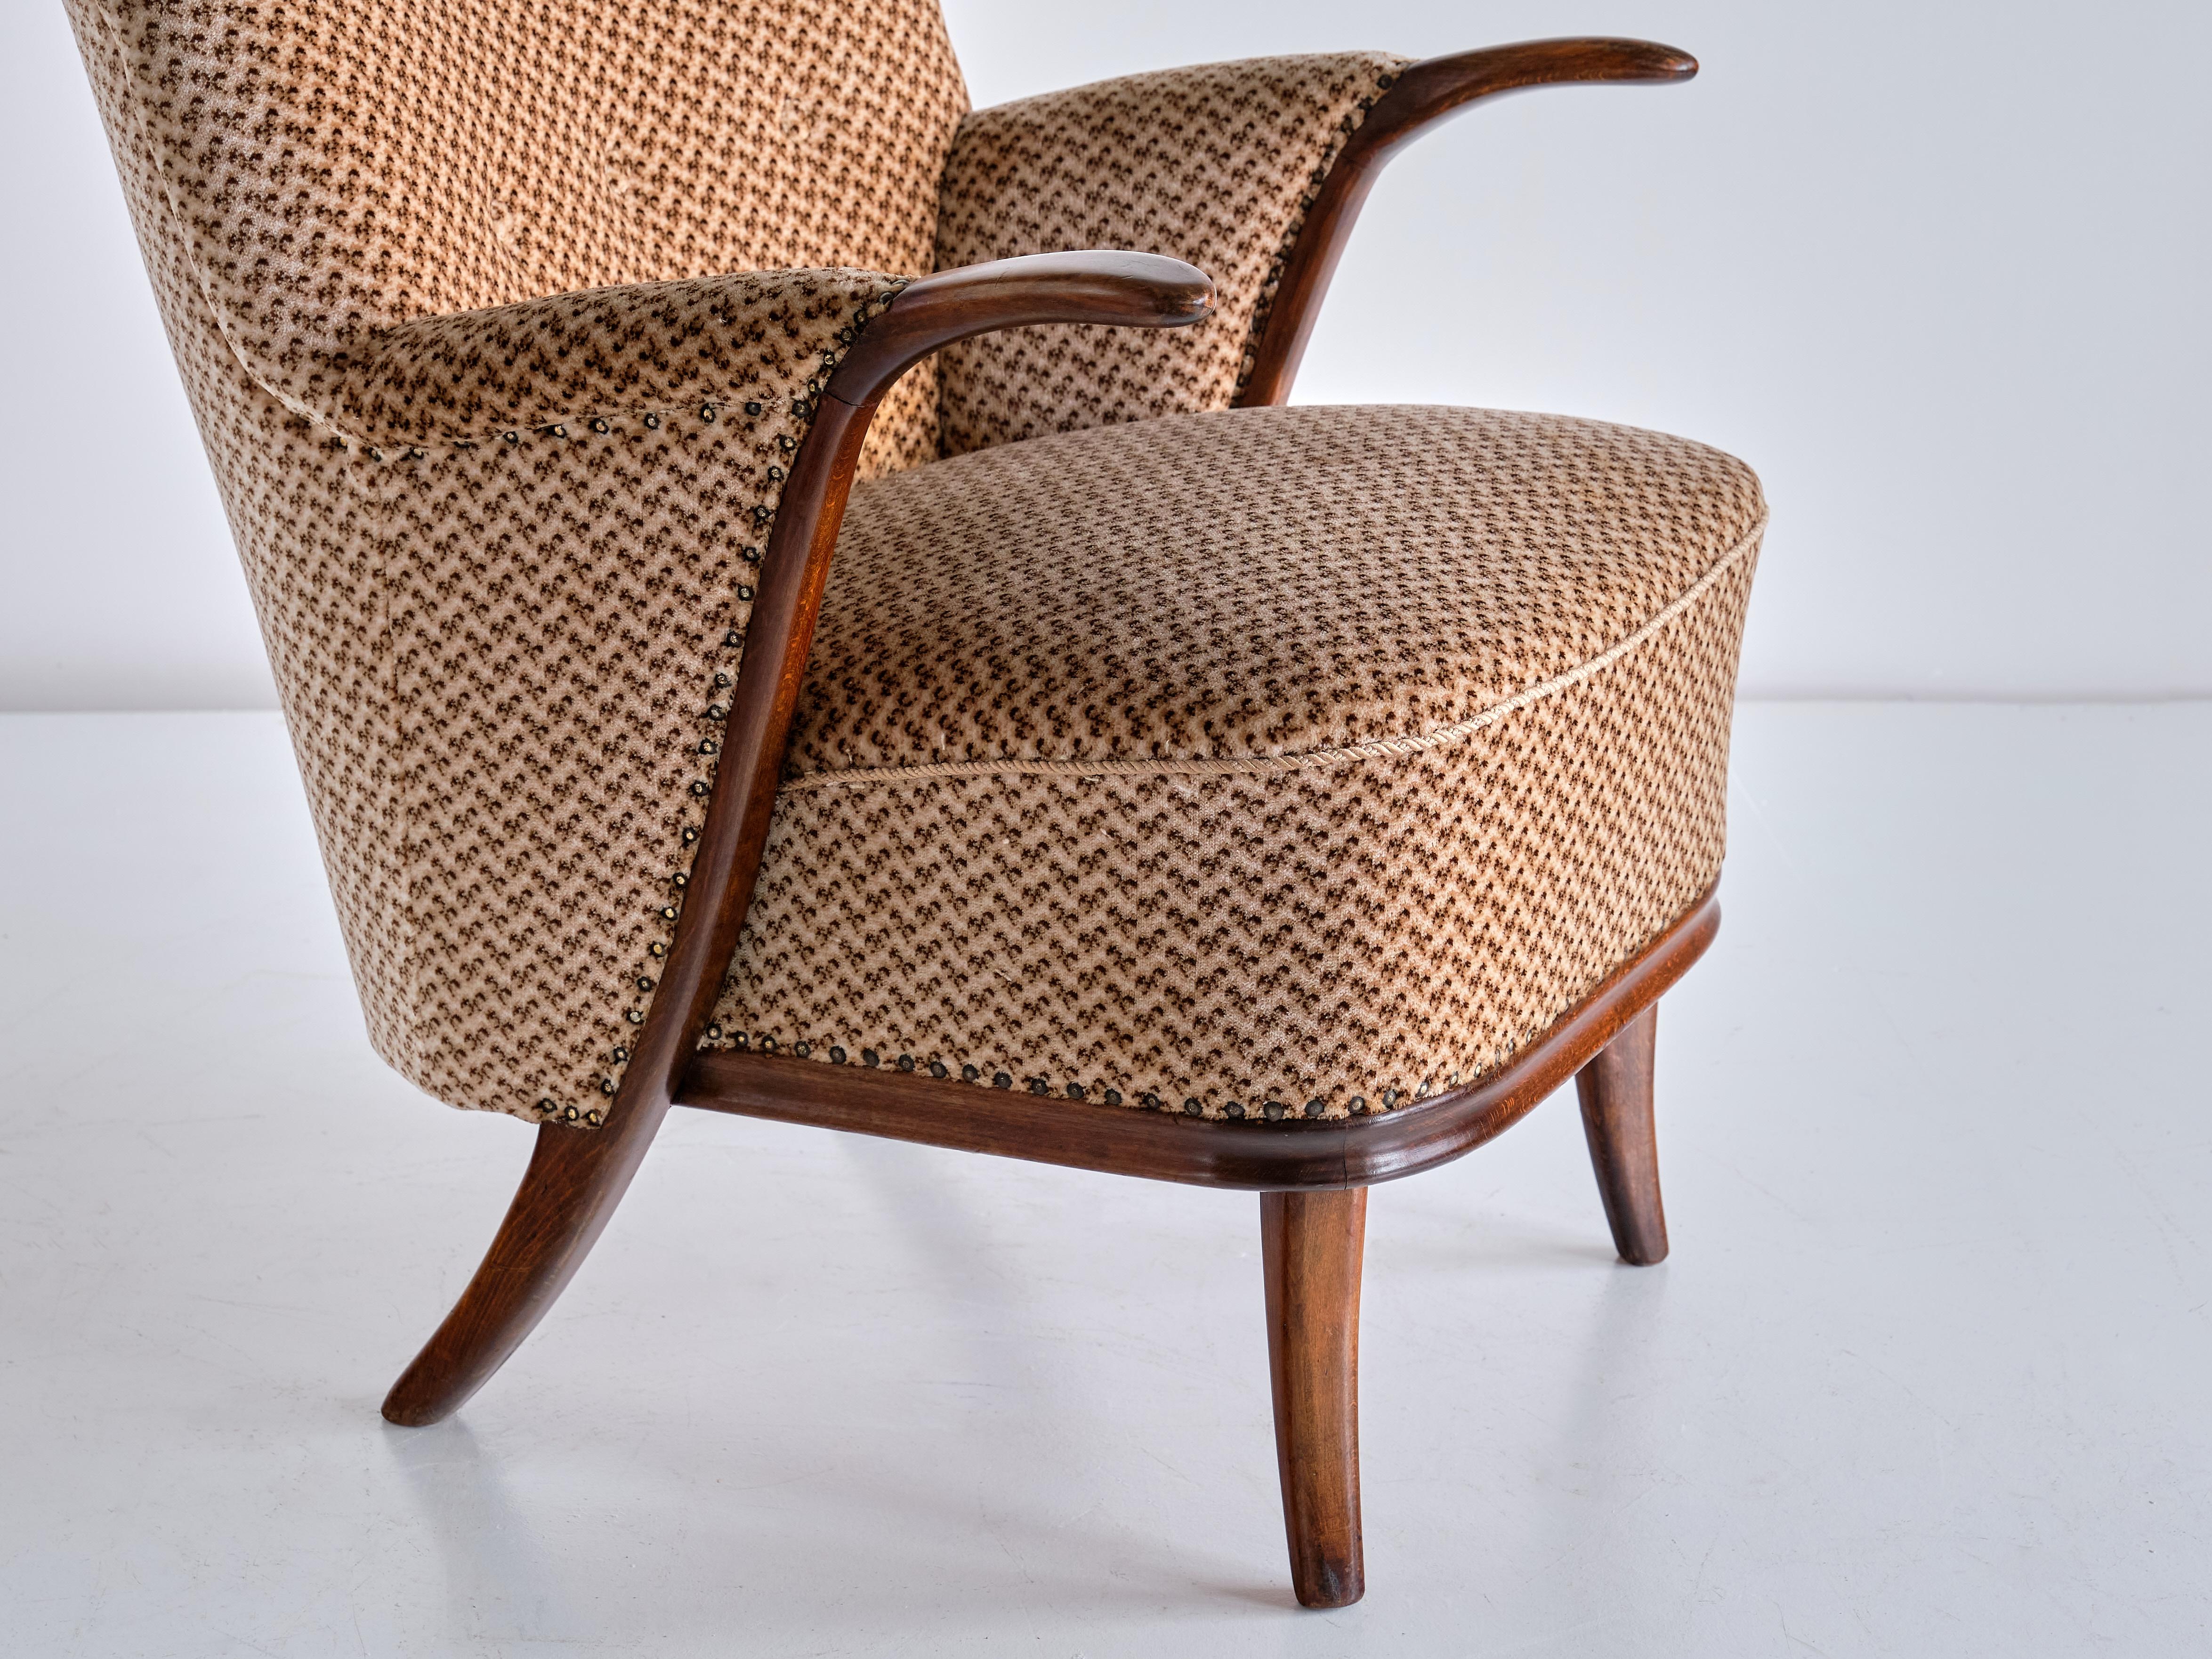 Sculptural Pair of Adolf Wrenger Armchairs in Beech and Velvet, Germany, 1950s For Sale 1